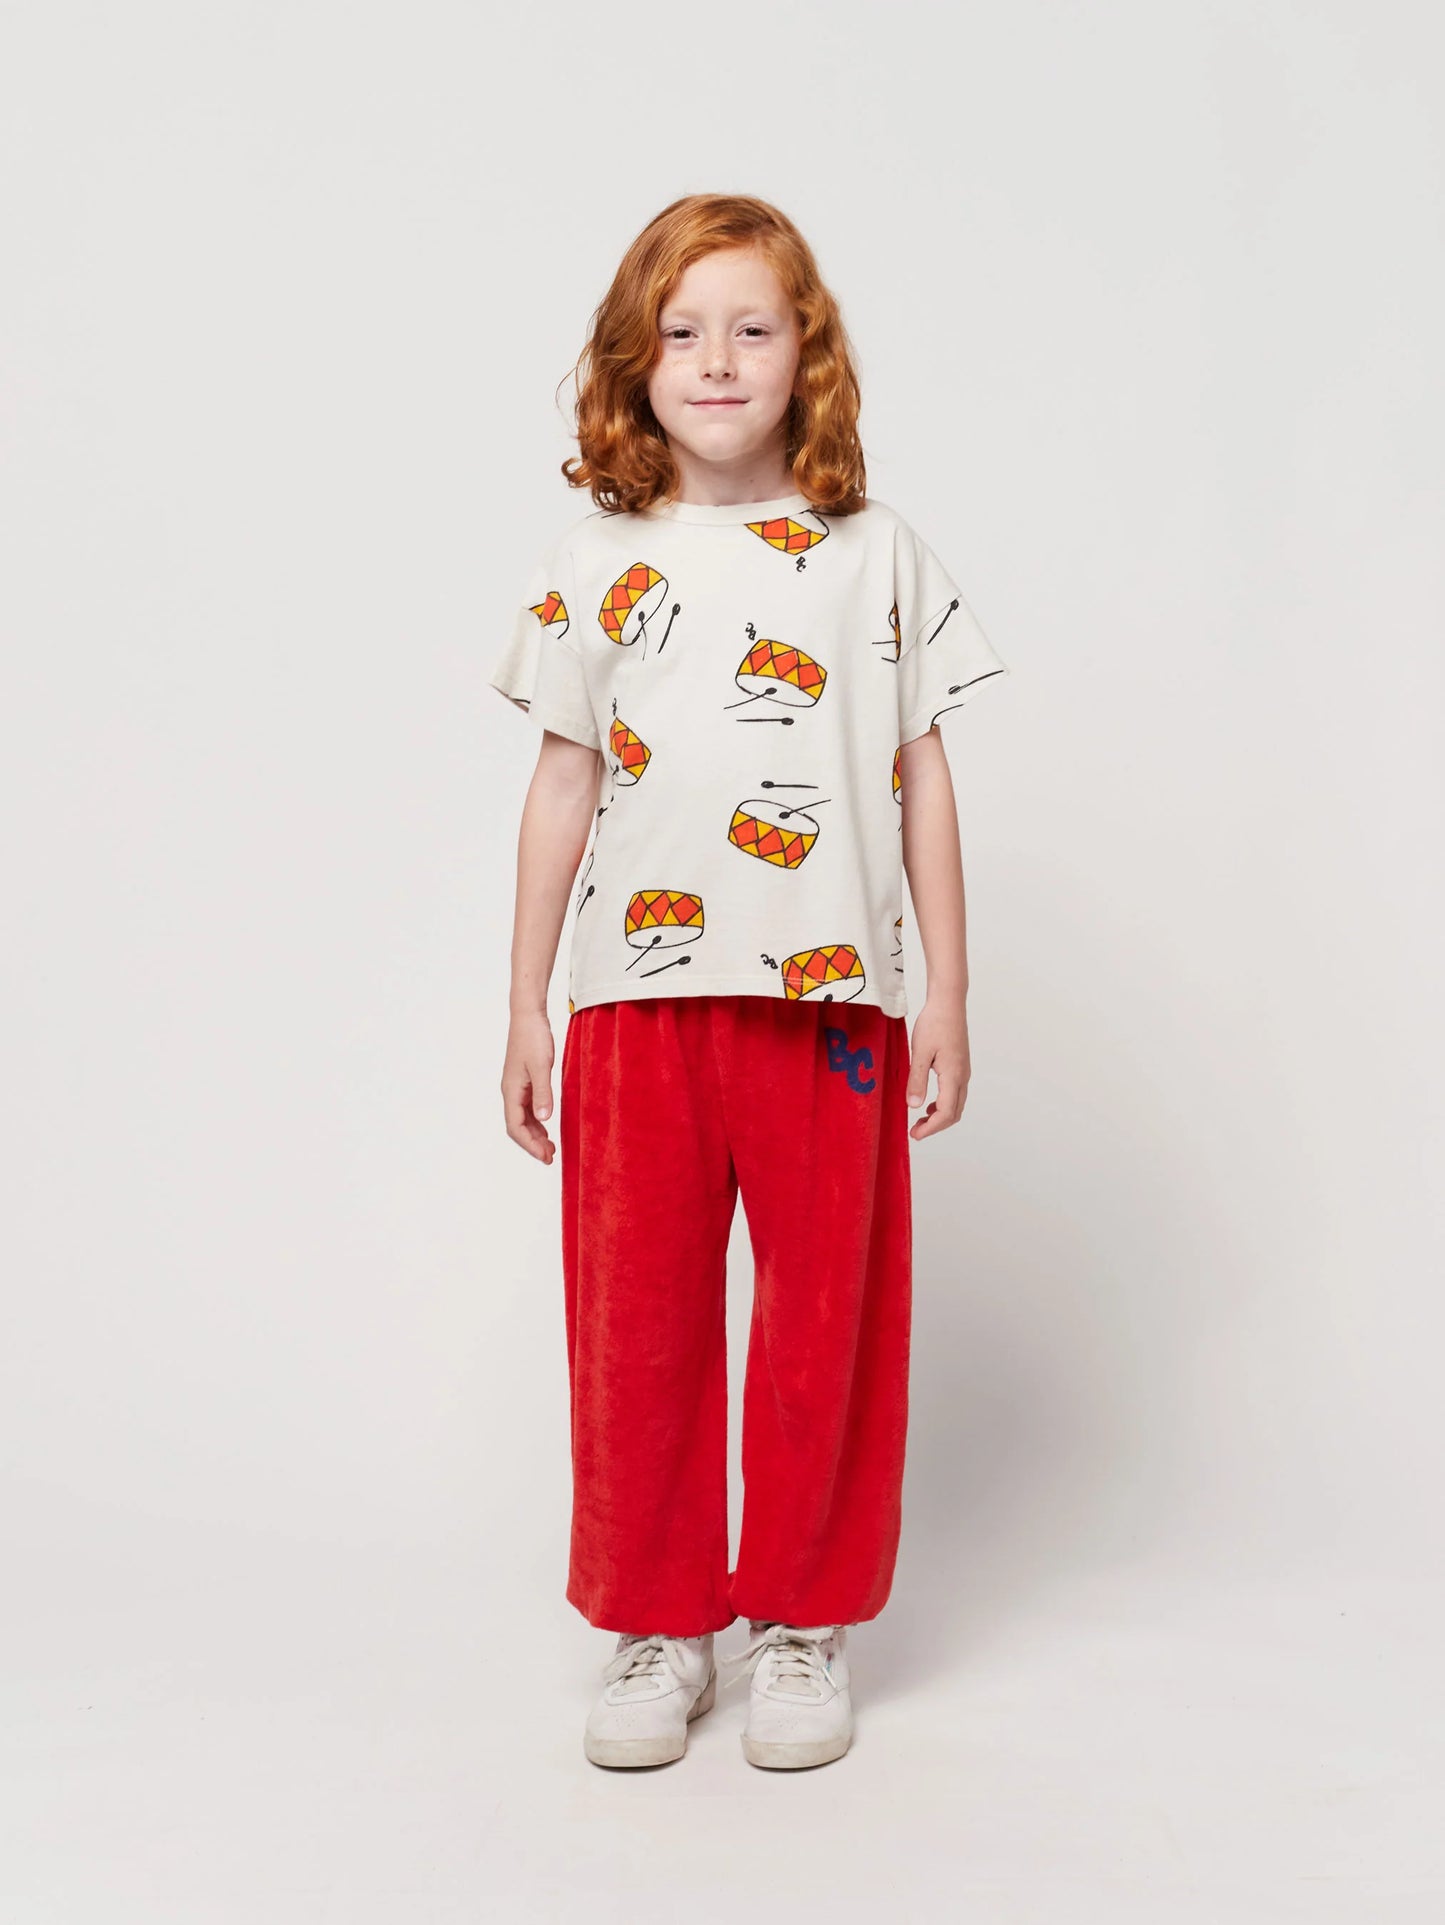 Bobo Choses Play the Drum All Over T-shirt